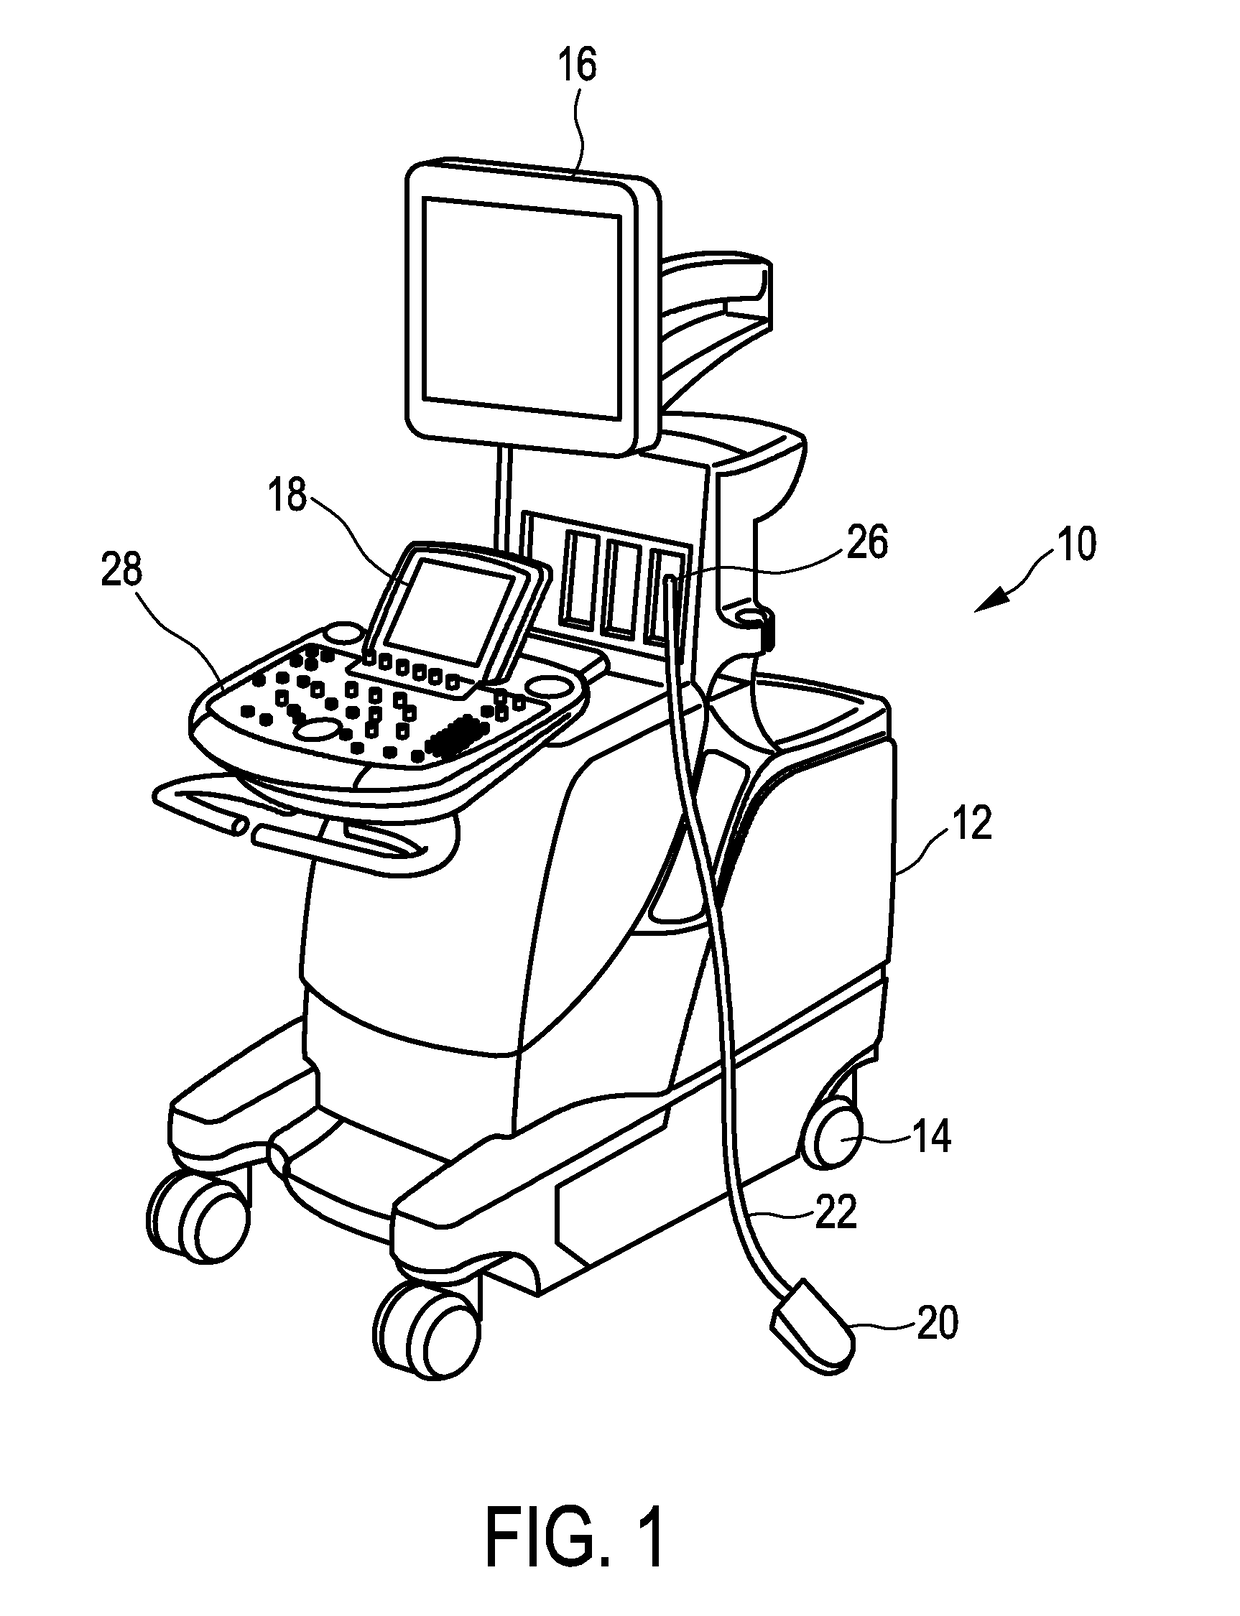 Ultrasound imaging system and method for image guidance procedure